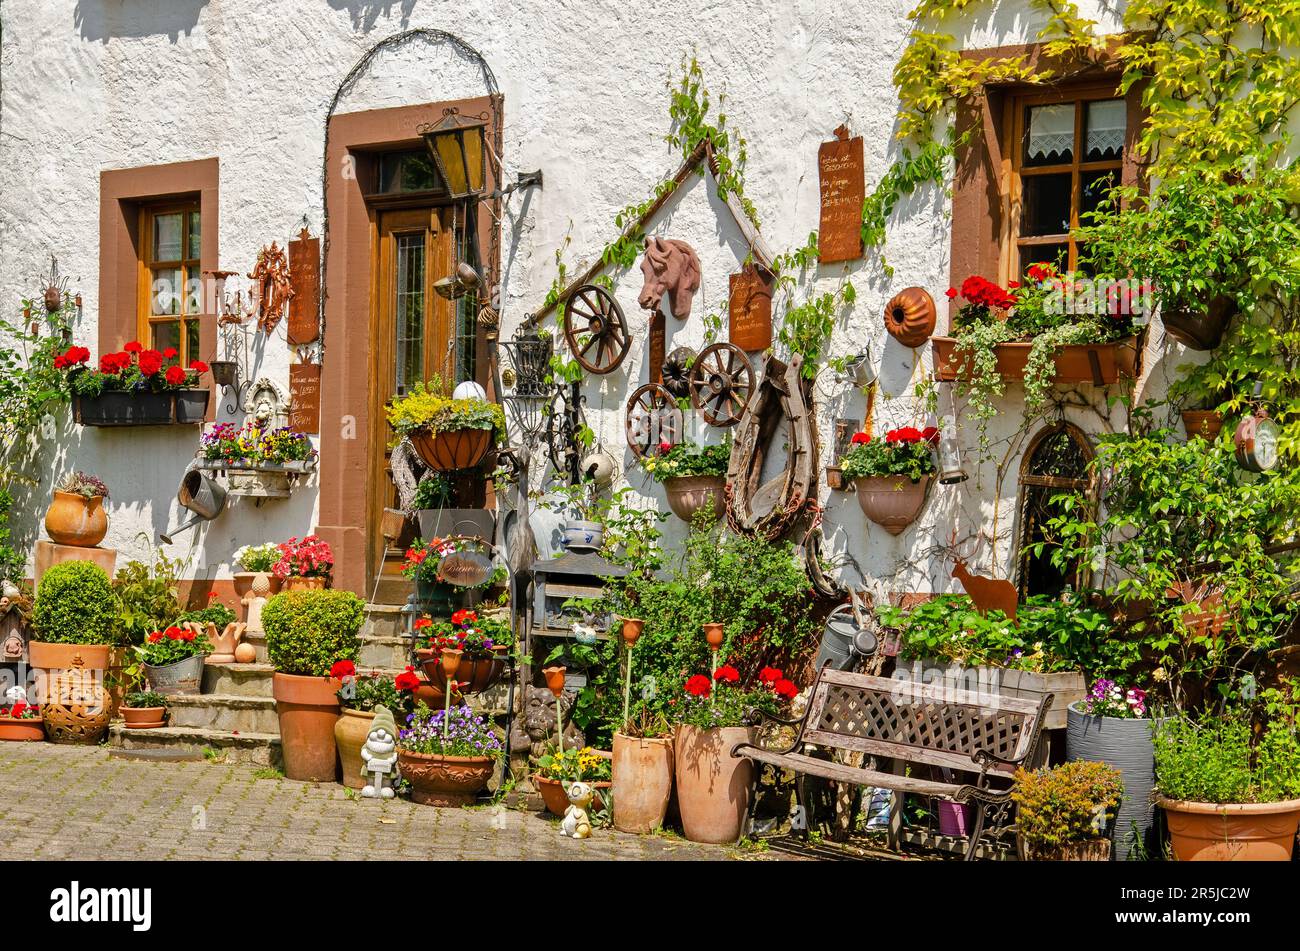 Schalkenmehren, Germany, May 26, 2023: white plaster facade with pots, plants, wheels and other traditional objects Stock Photo